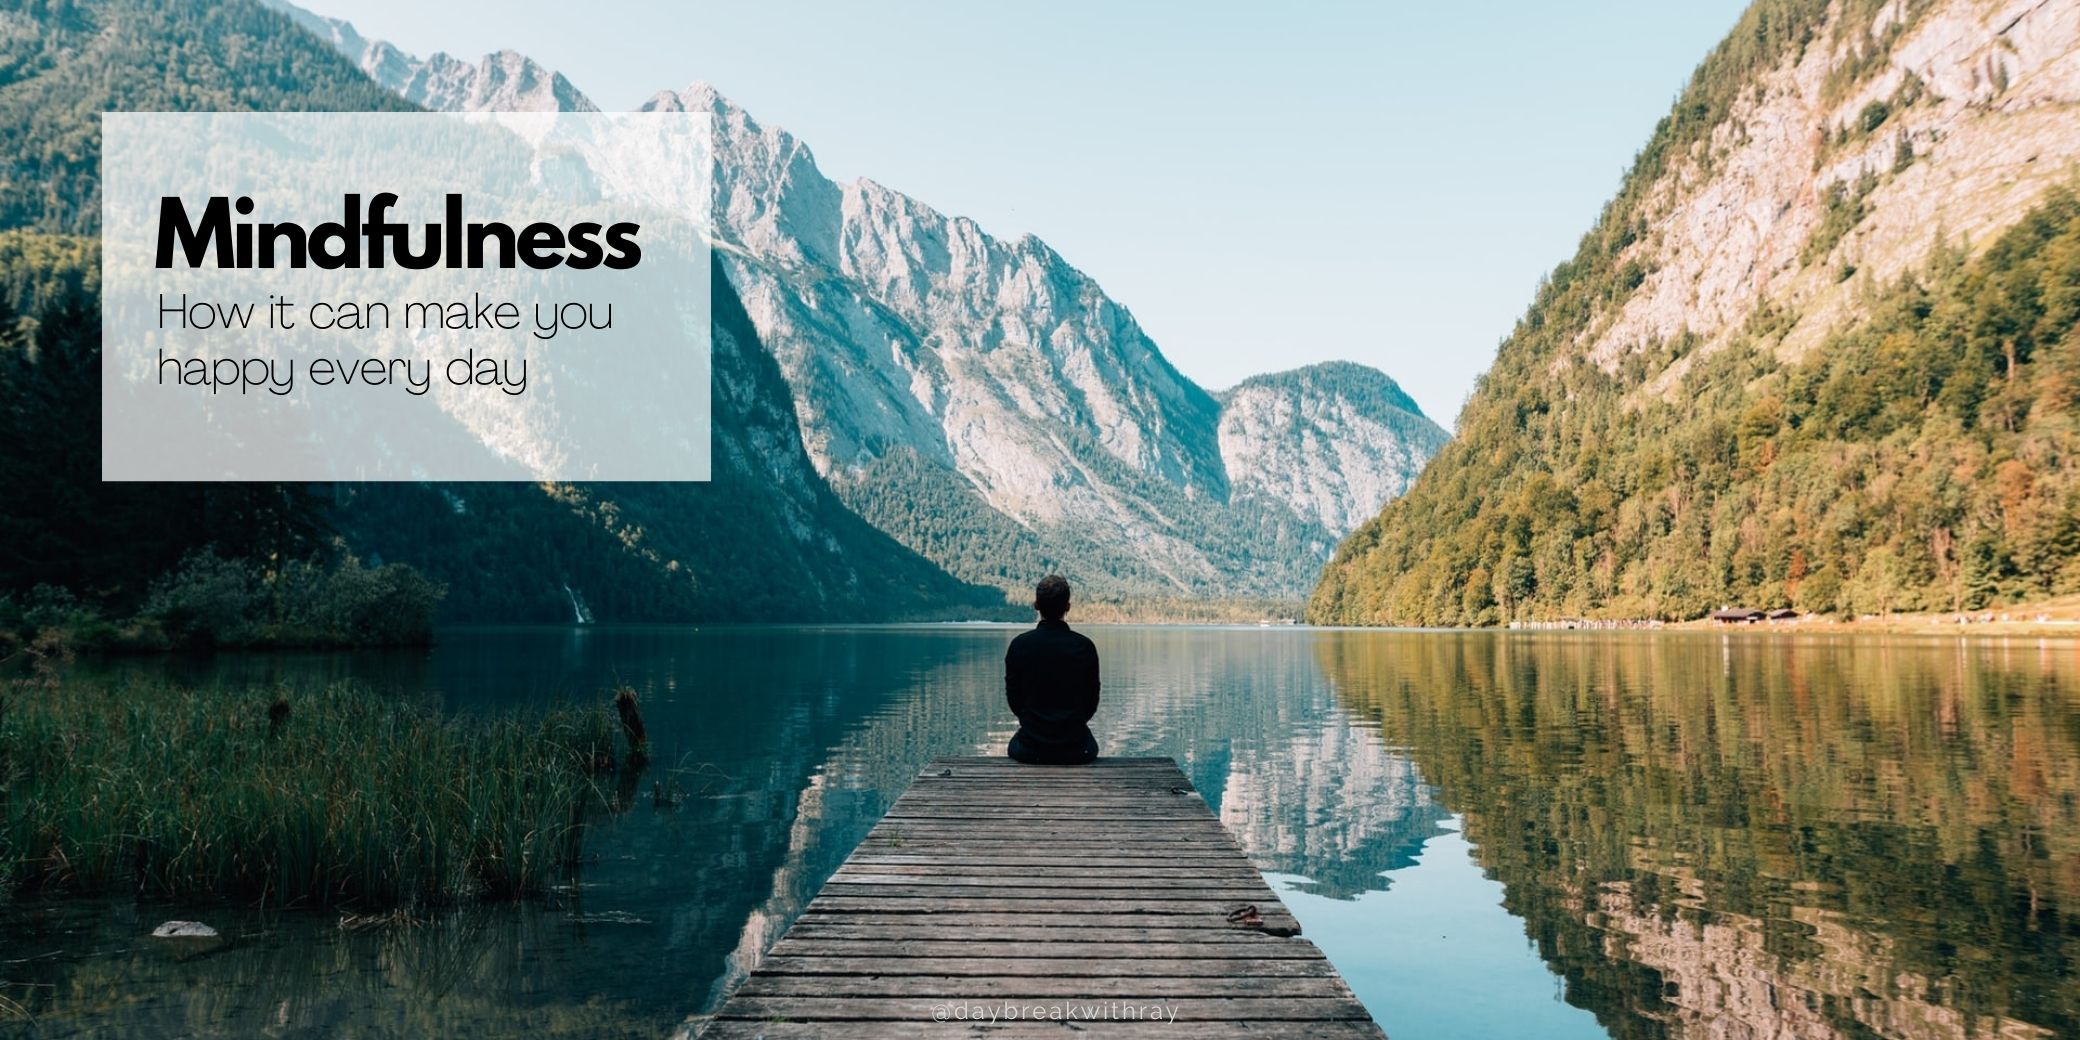 (Featured Image) How Mindfulness Can Make You Happy Every Day